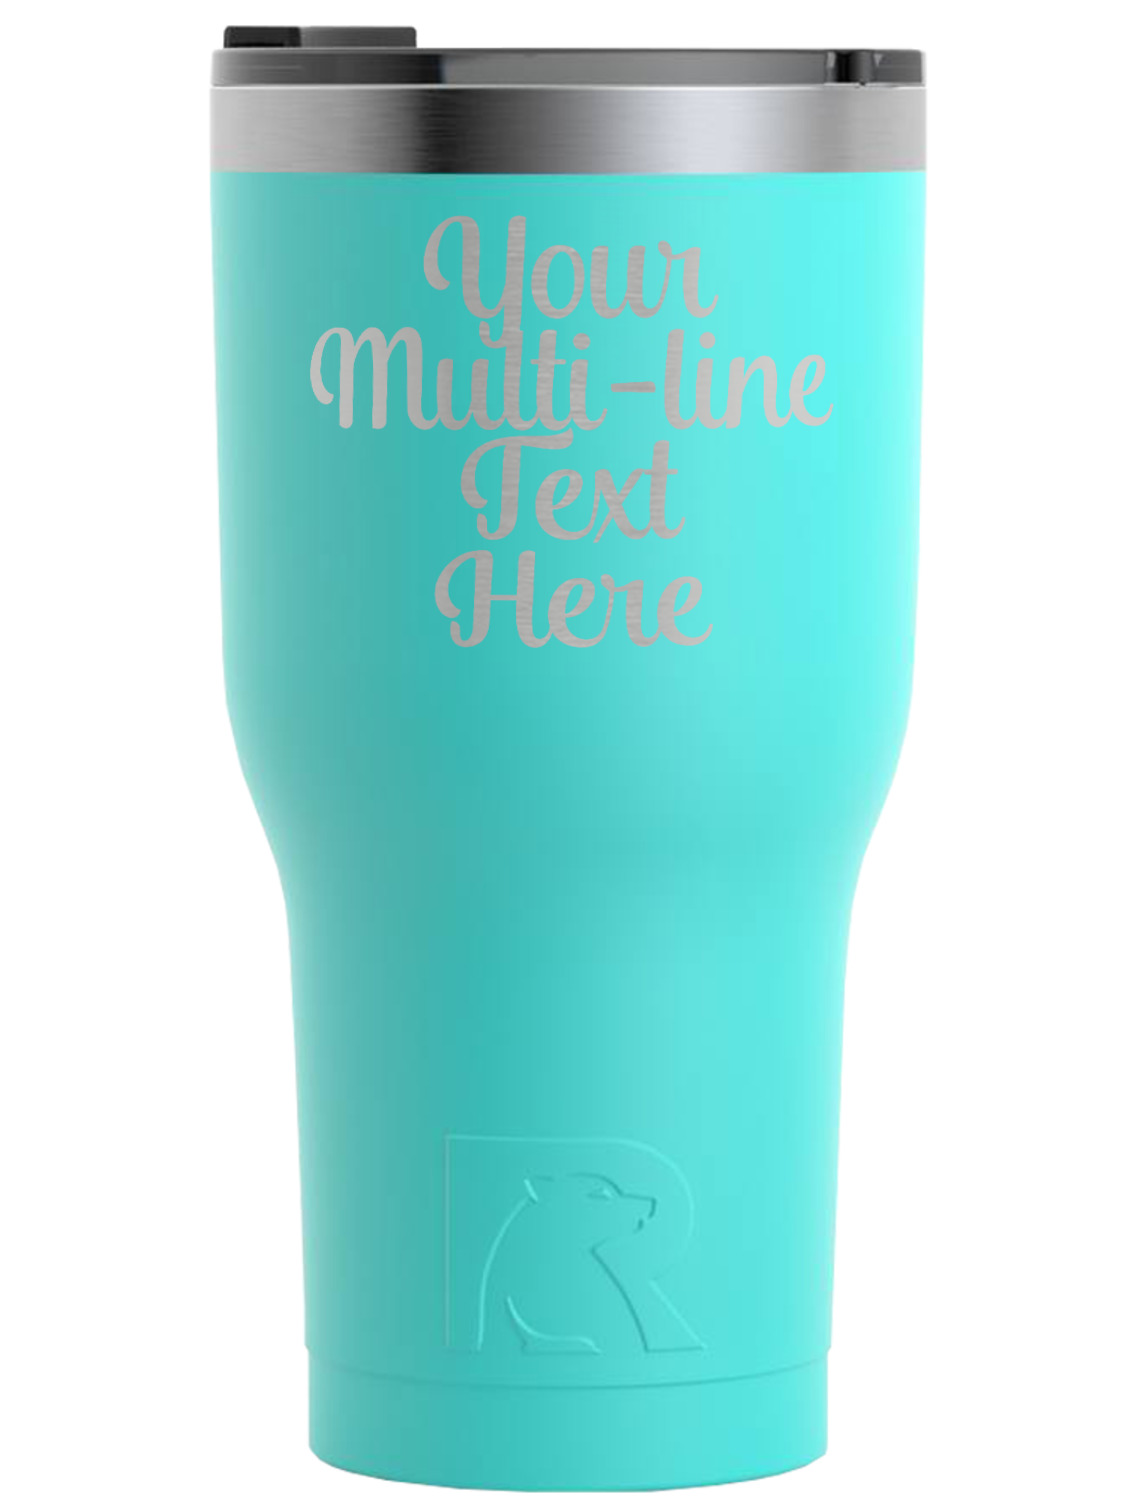 https://www.youcustomizeit.com/common/MAKE/837471/Multiline-Text-Teal-RTIC-Tumbler-Front-3.jpg?lm=1665683647